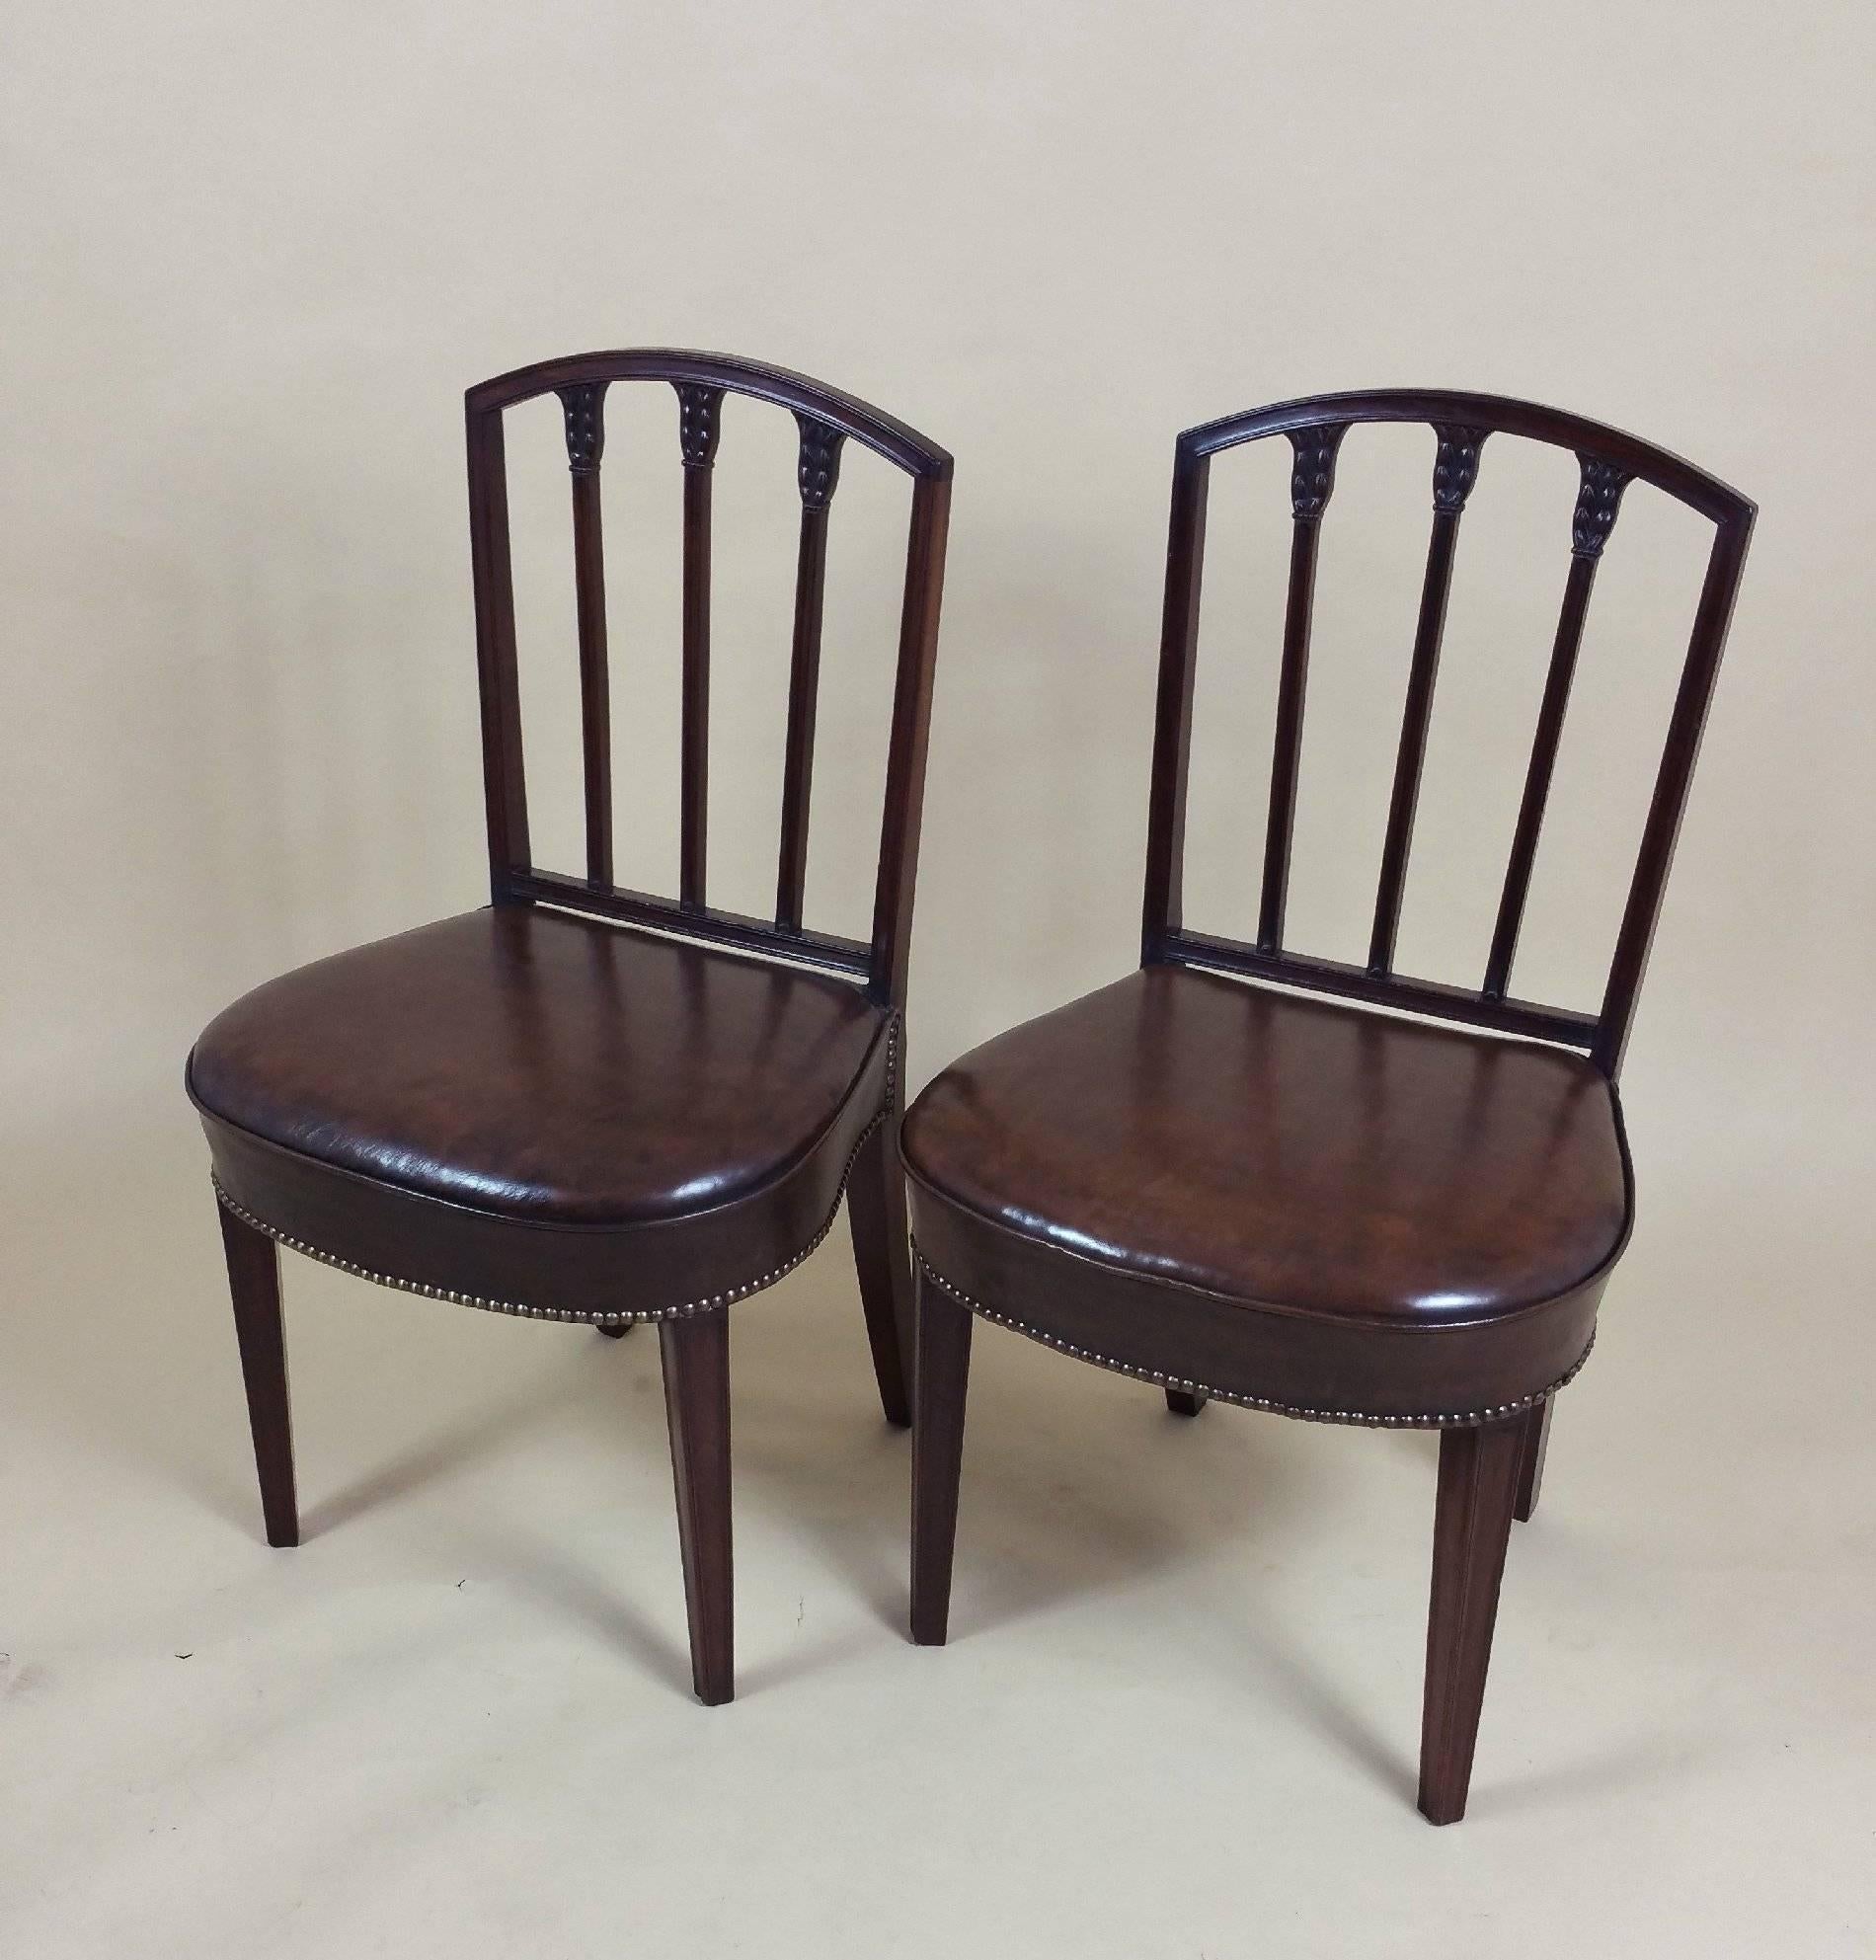 This splendid and rare set of ten English mahogany 18th century. Sheraton dining chairs feature delicately carved honeysuckle on the back splats and very comfortable hide shaped leather seats with brass stud trim. Each chair measures 20 ½ in – 52 cm